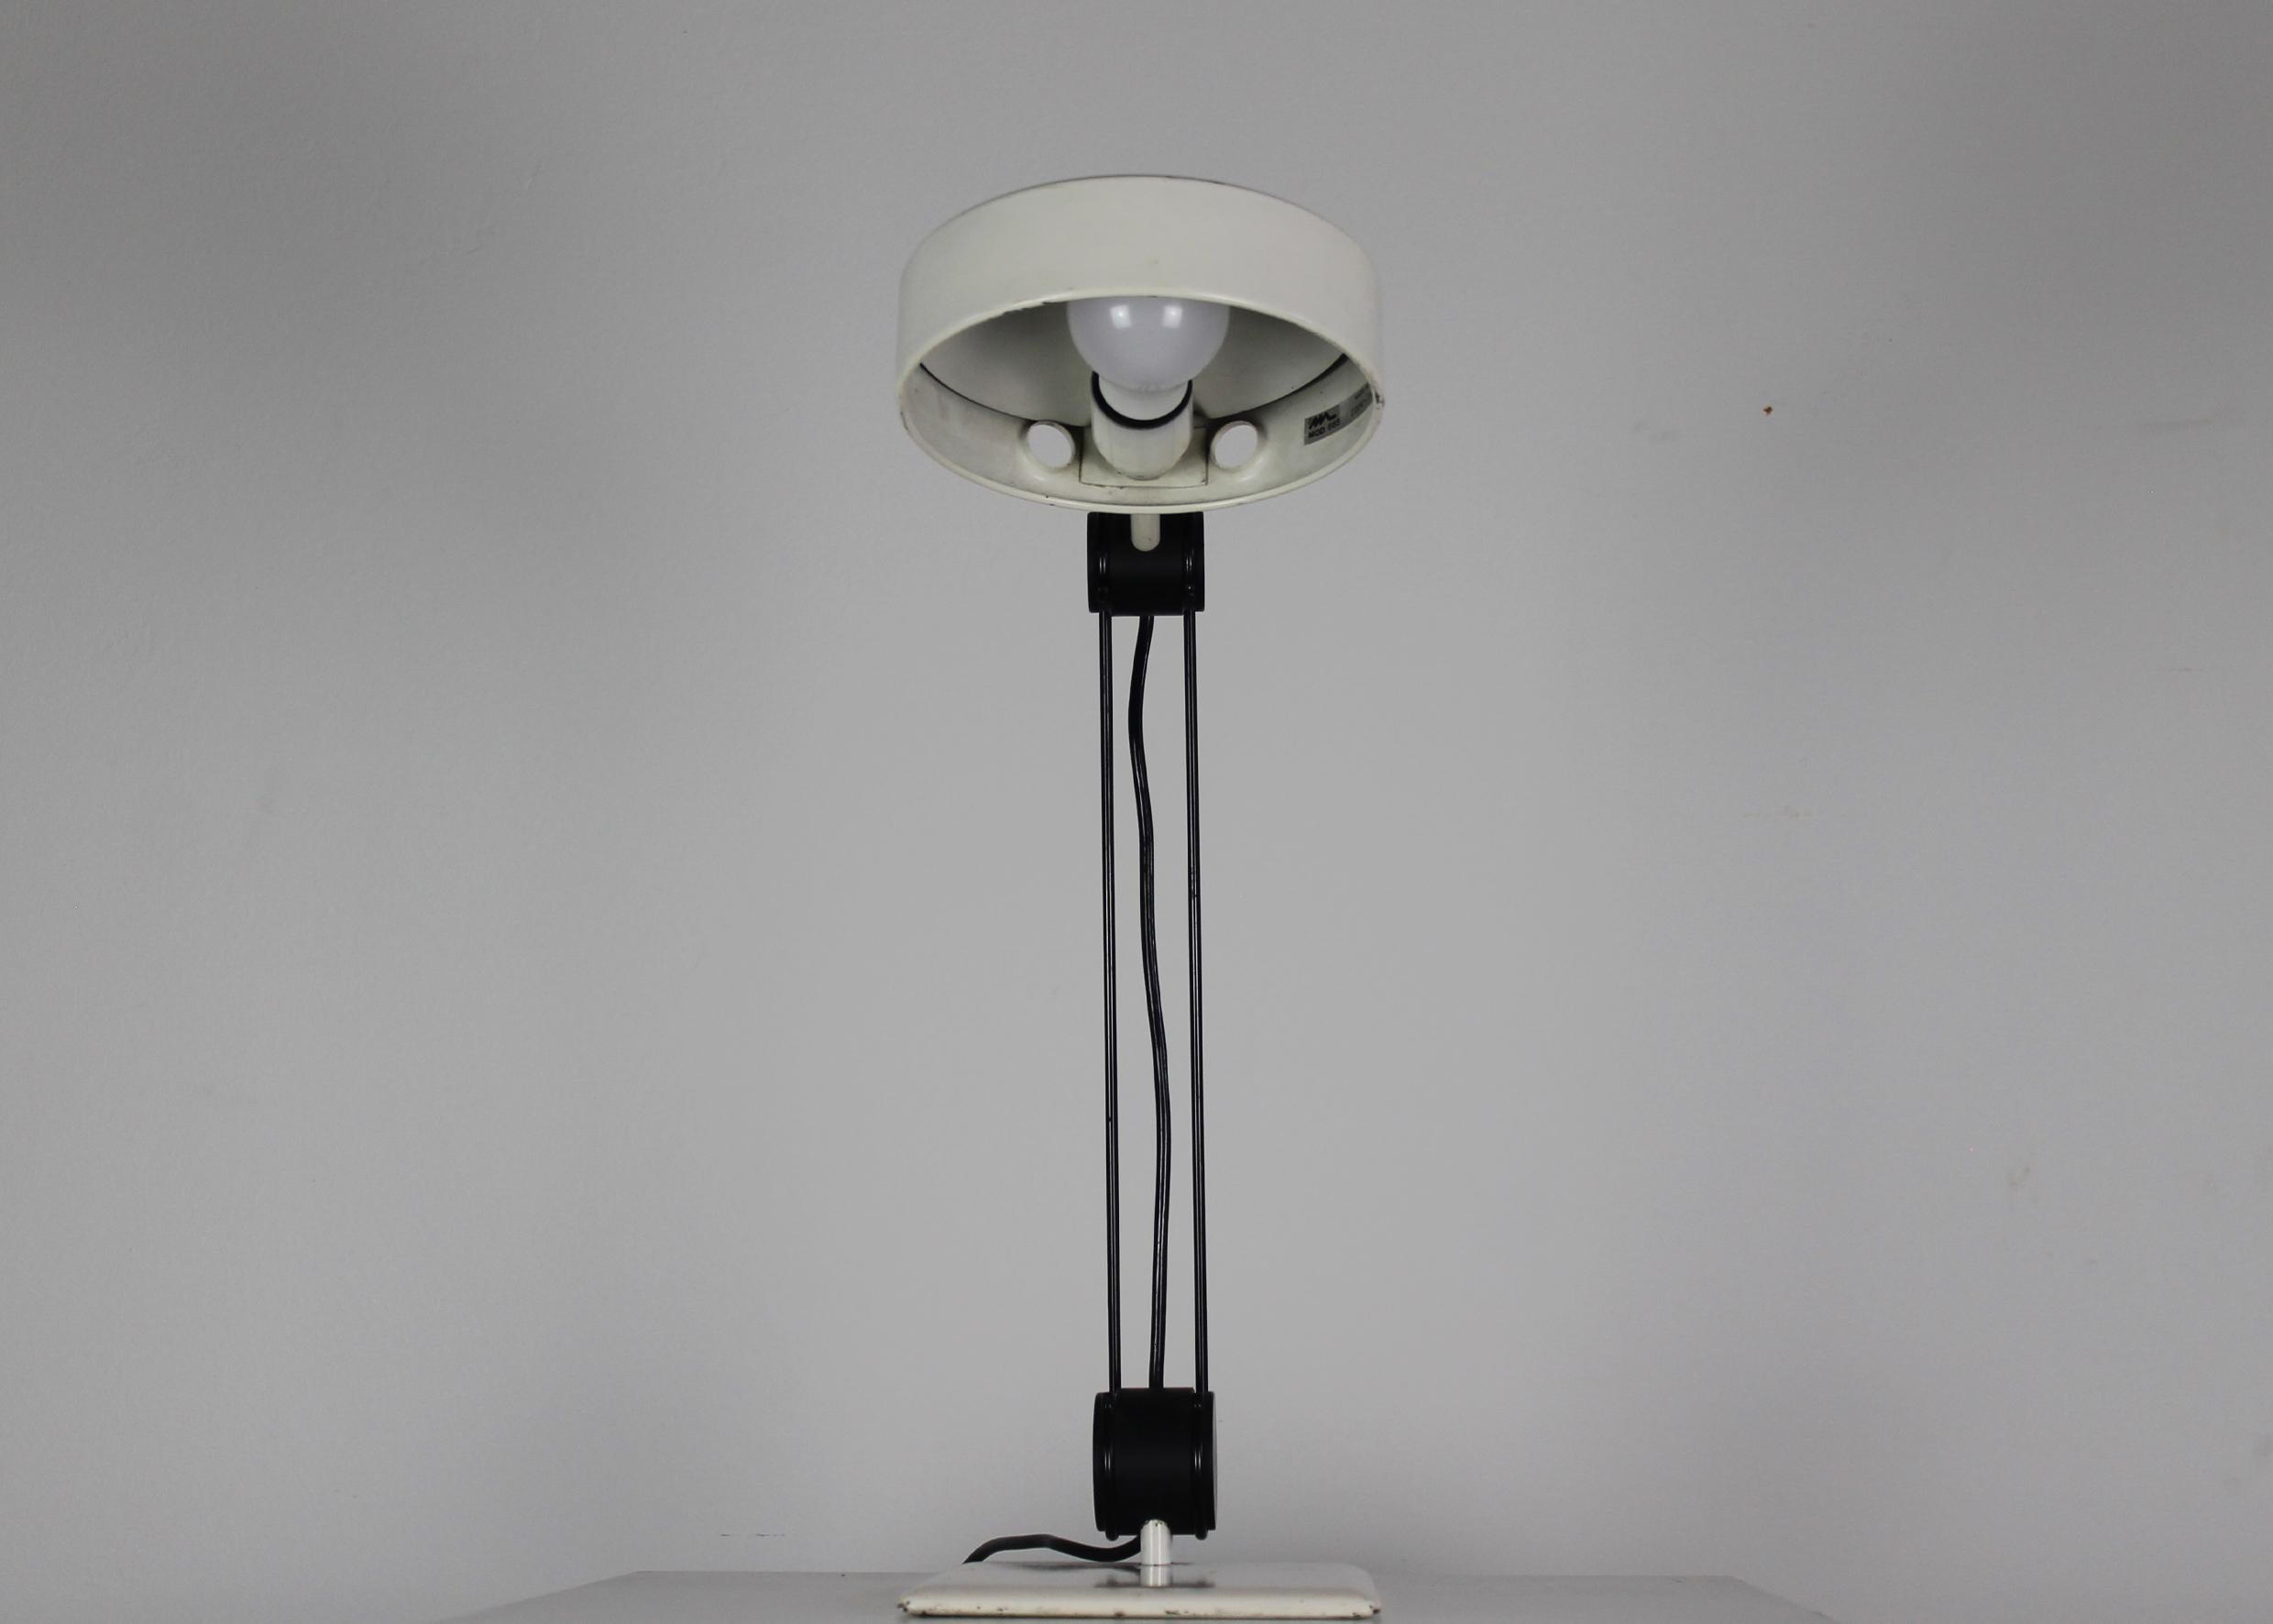 Mid-Century Modern Desk Lamp Model 665 in White Lacquered Metal by Martinelli Luce 1970s For Sale